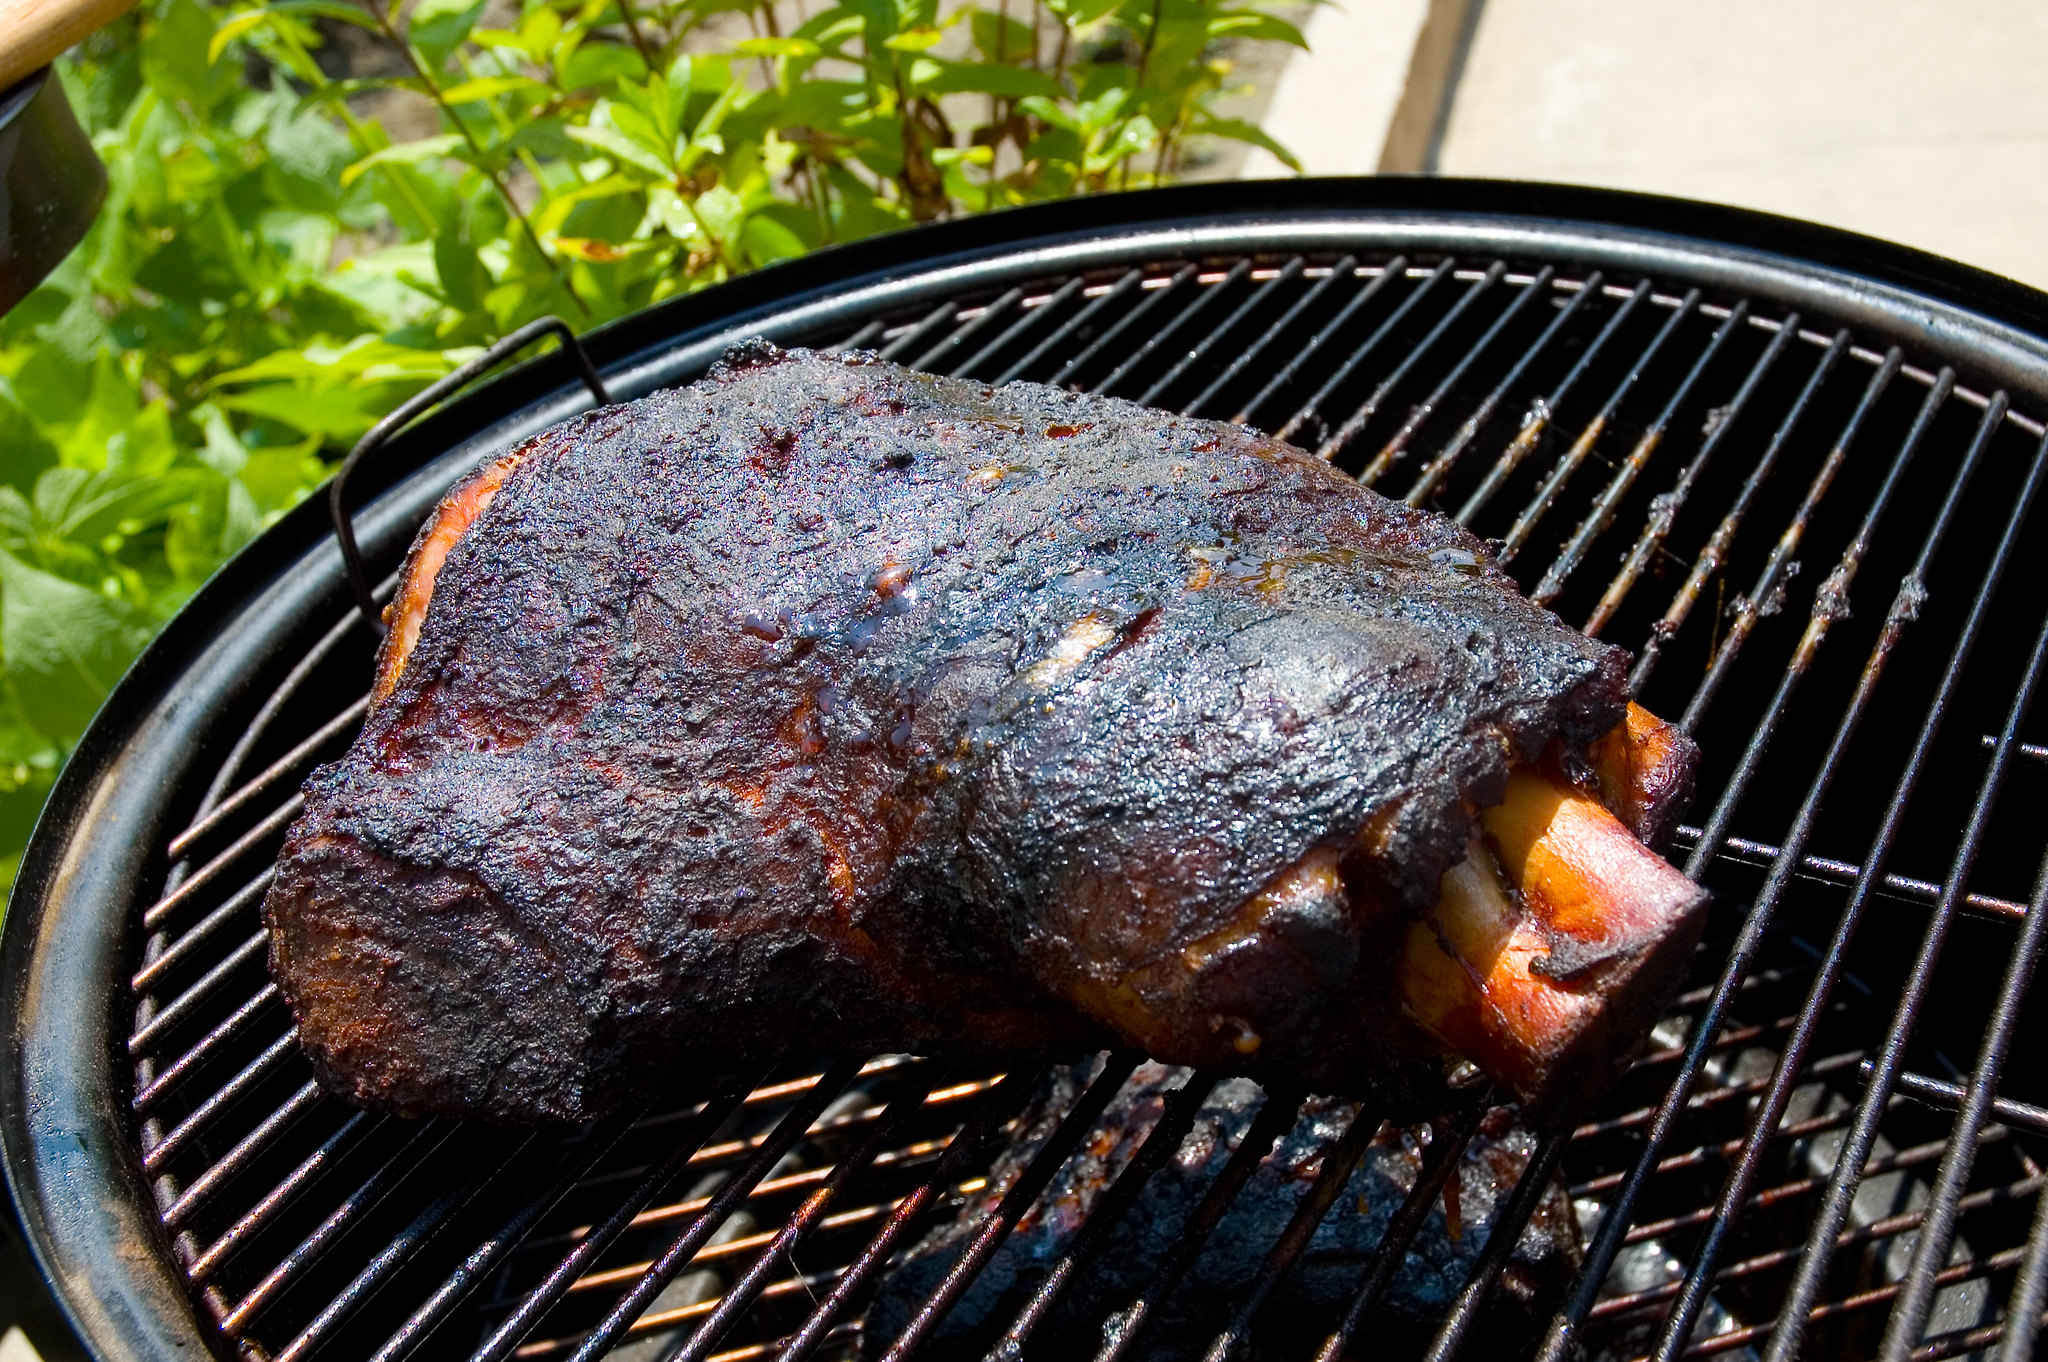 Should you wrap the pork shoulder in foil during the smoke?